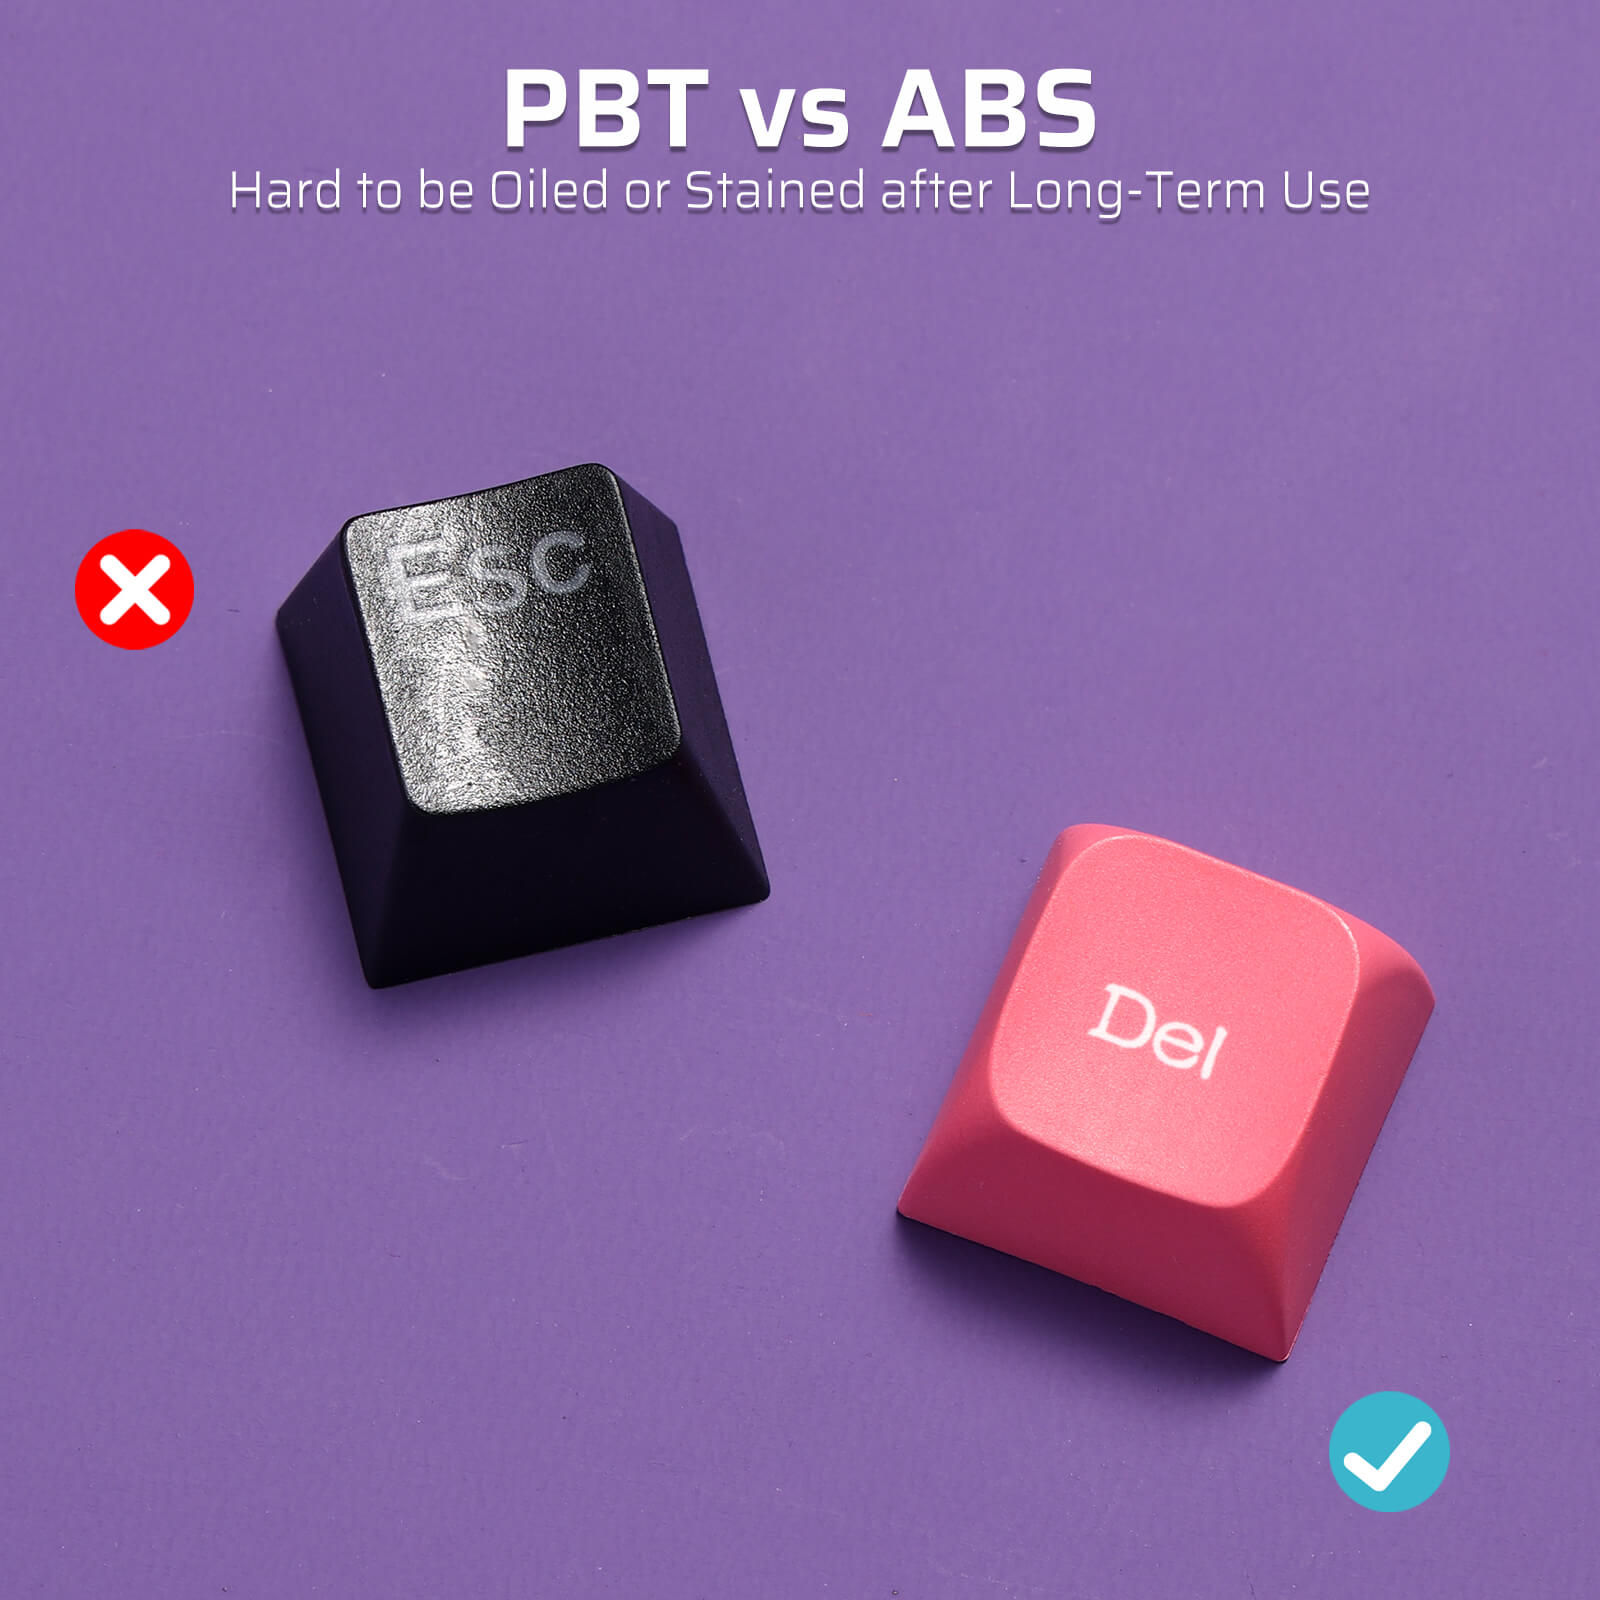 PBT Double Shot 112-Key Sublimation Keycaps Set, KDA Profile for ANSI Layout 61/68/84/87/98/104 Keys Mechanical Keyboard, with Keycap Puller - (Only Keycaps), Neon Purple